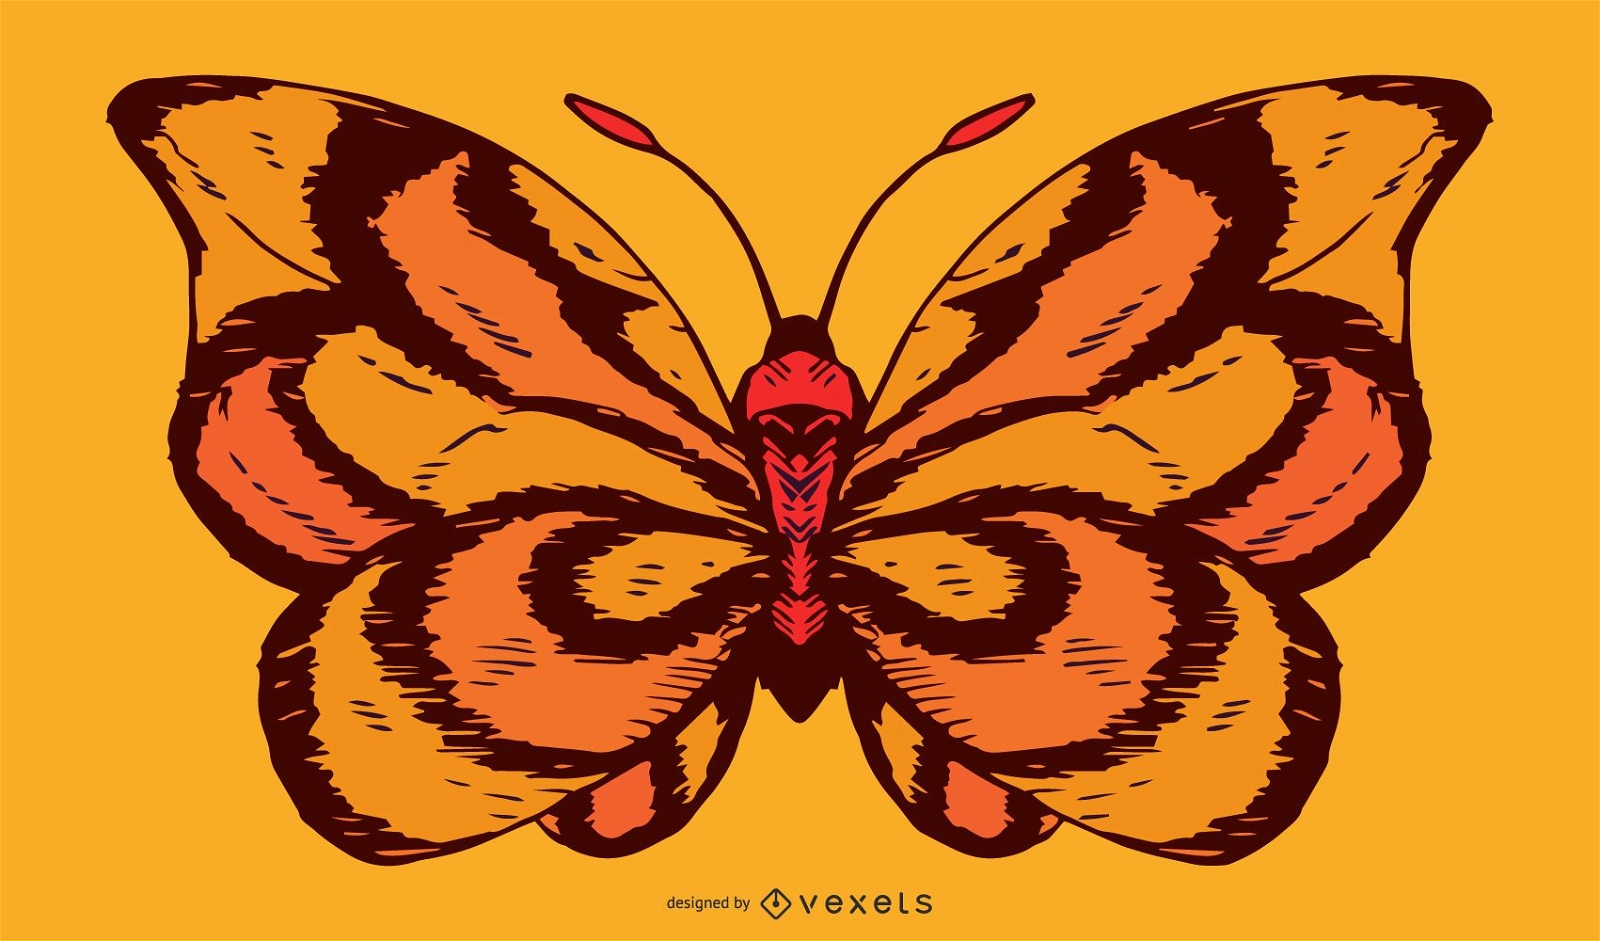 Free Vector Butterfly